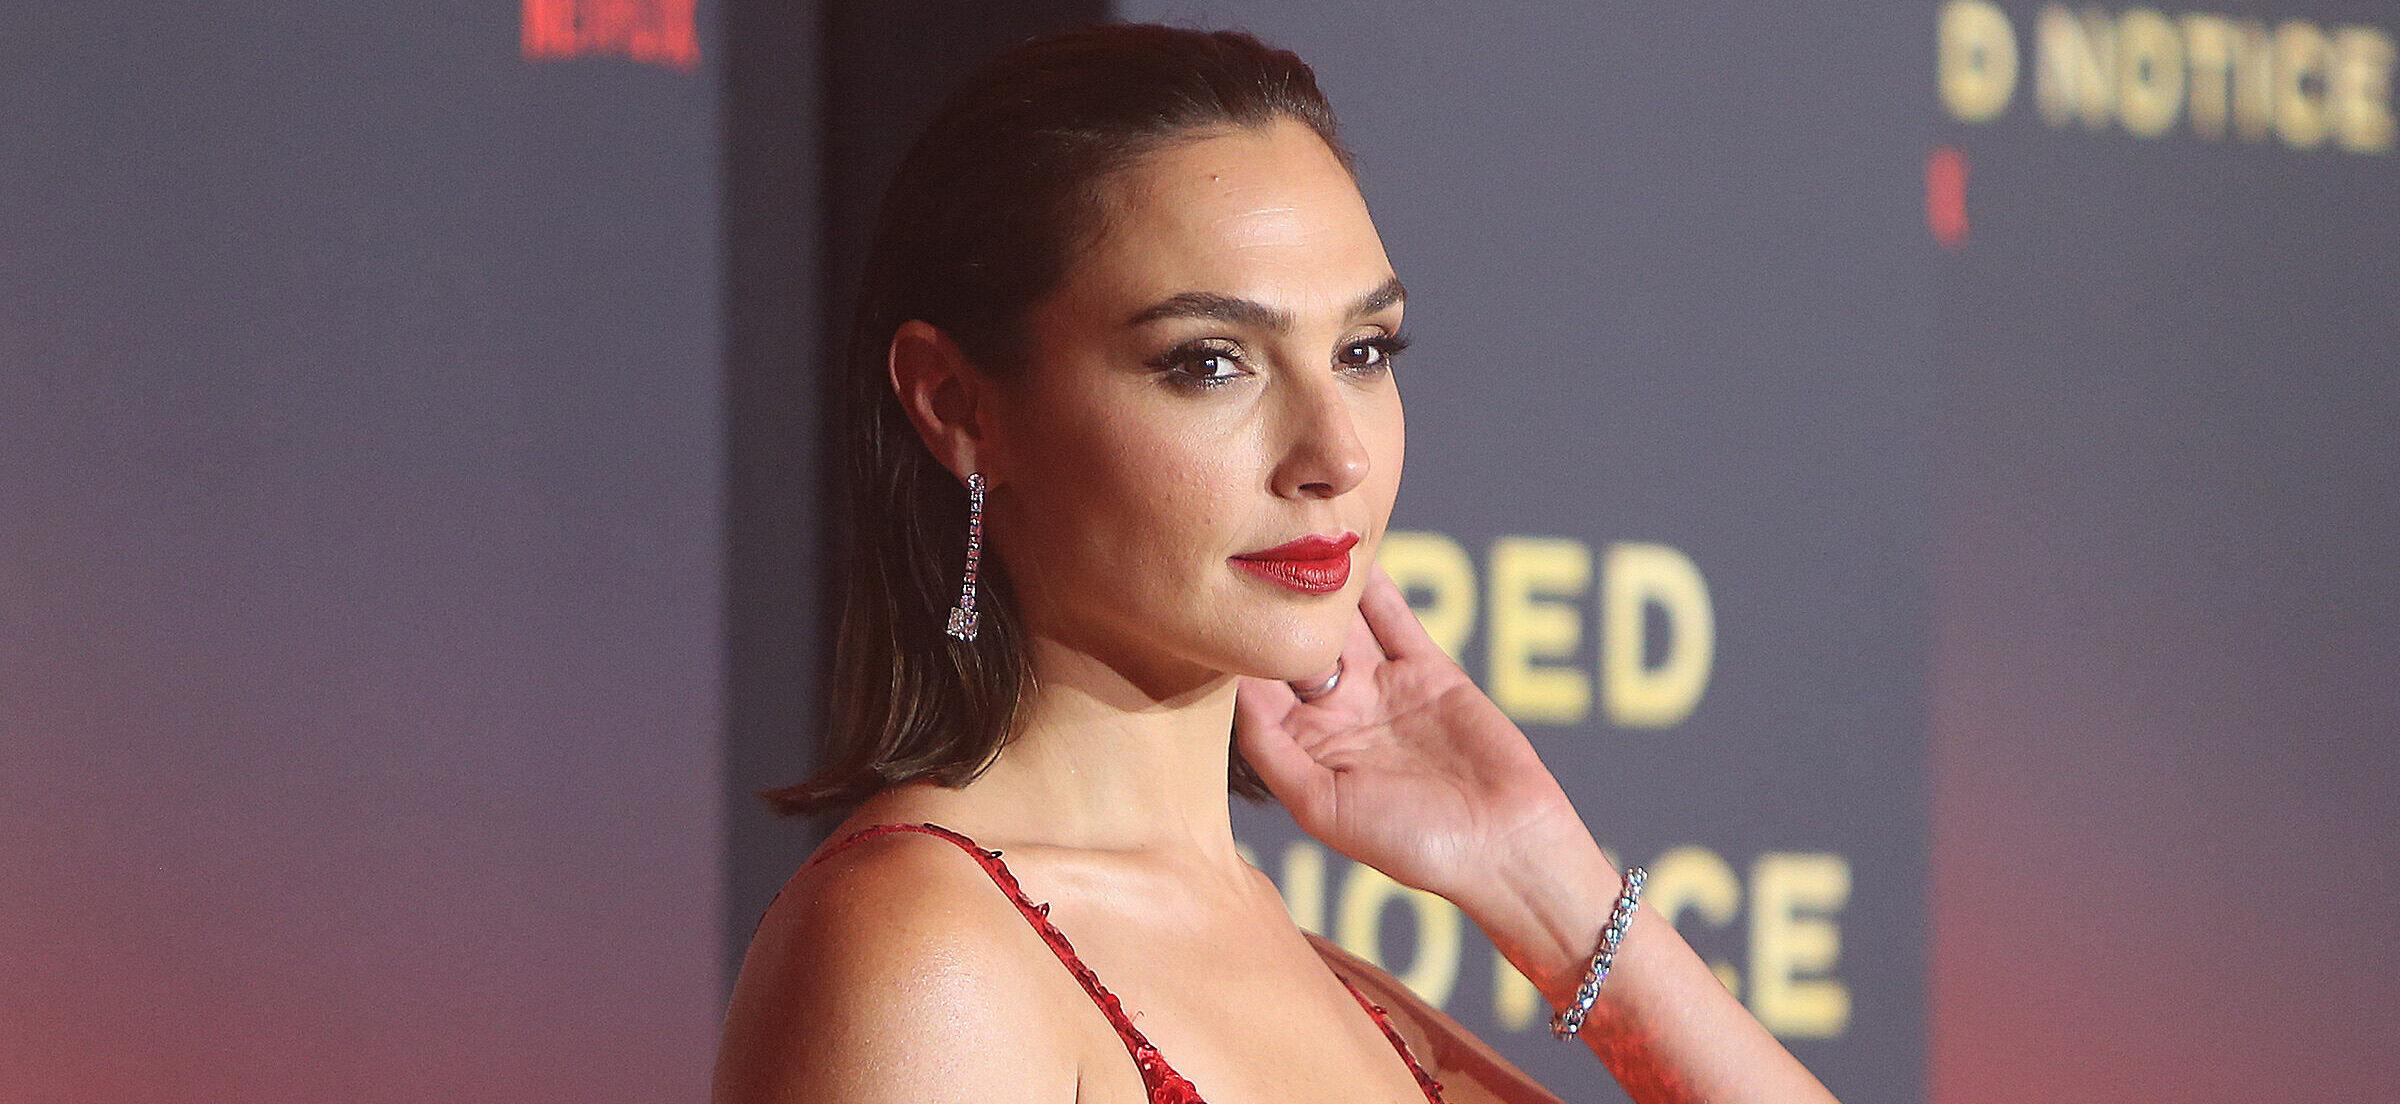 Gal Gadot Describes Being A Working Mom As ‘Messy & Chaotic’ With Vicious Cycles Of ‘Guilt Trips’